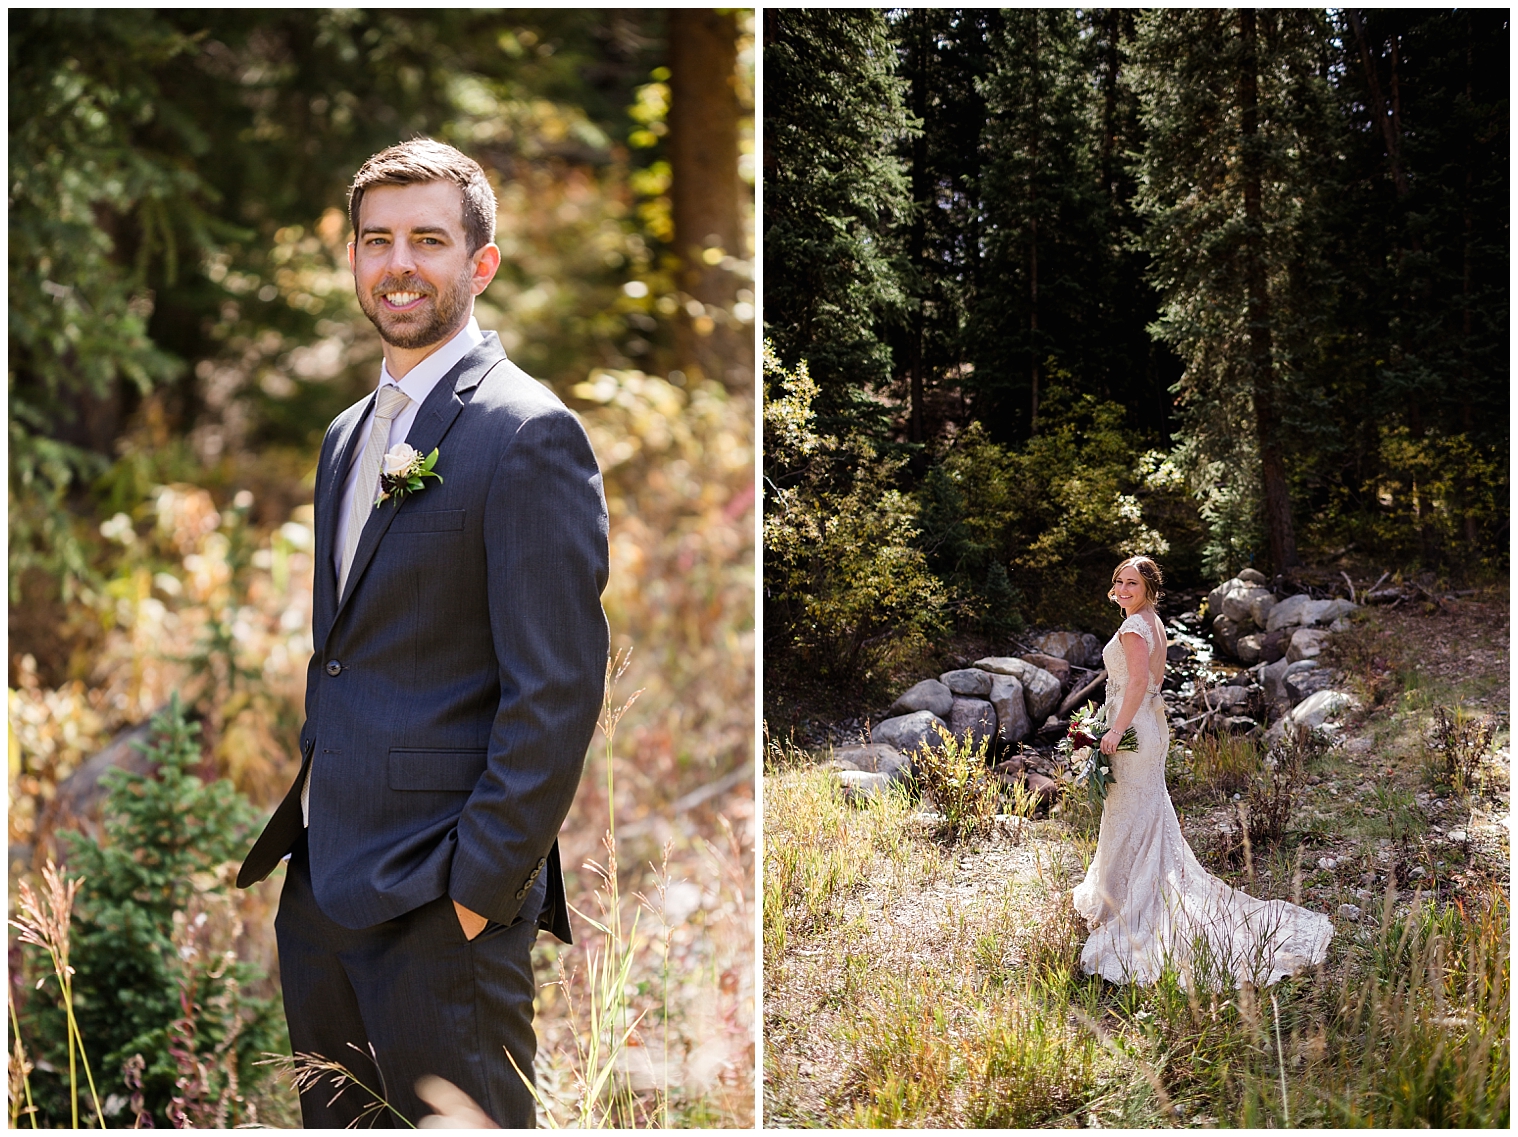 Individual portraits of the bride and groom by a Colorado mountain wedding photographer on their Copper Mountain wedding day.